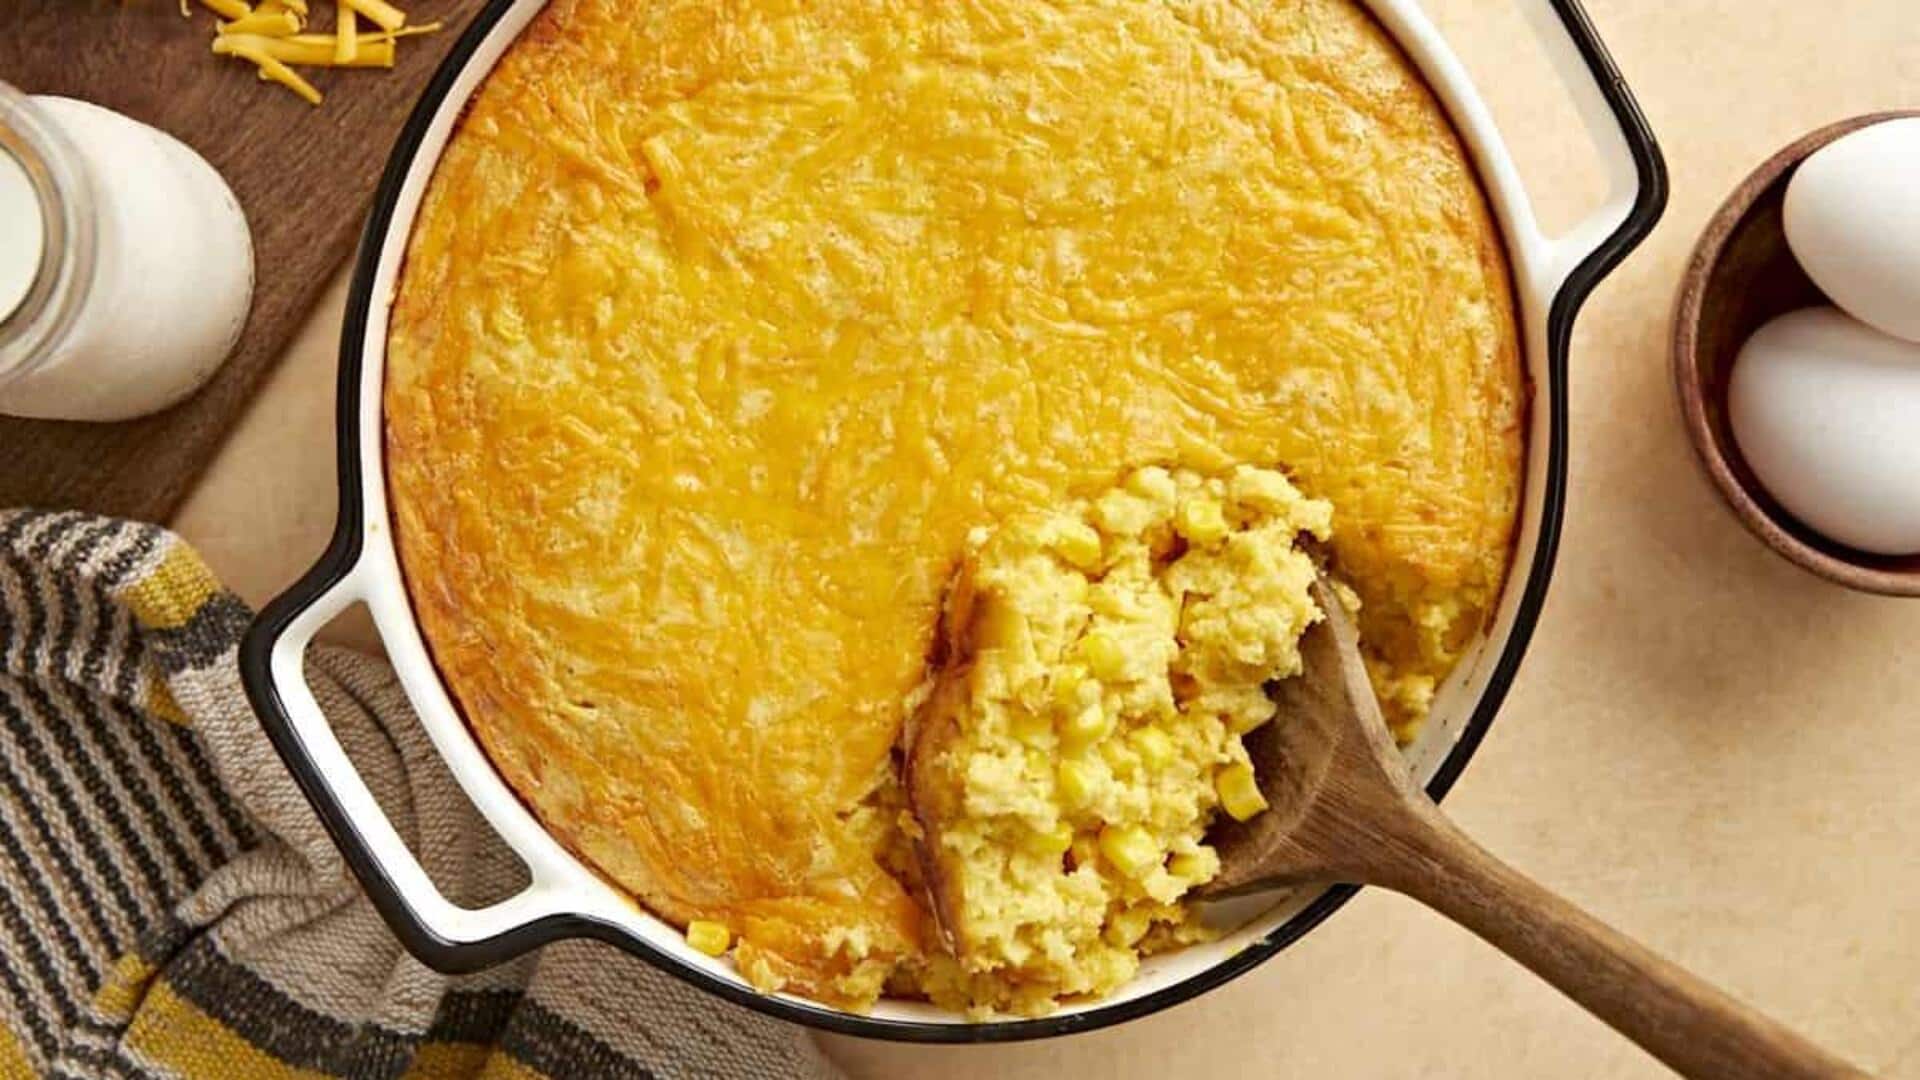 Learn to make corn pudding at home with this recipe